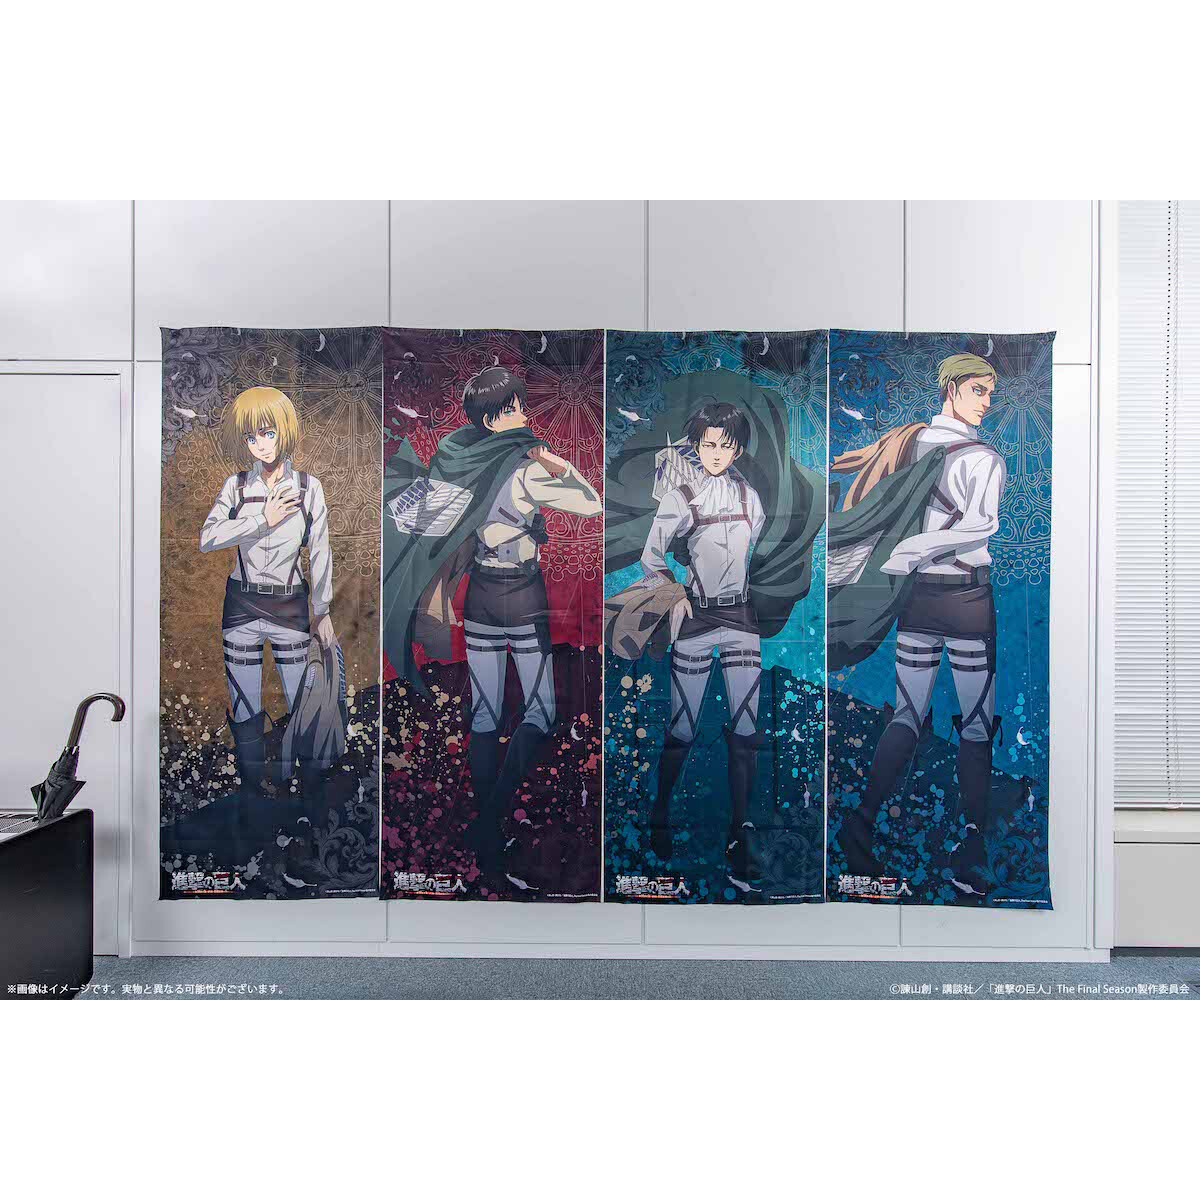 life sized posters